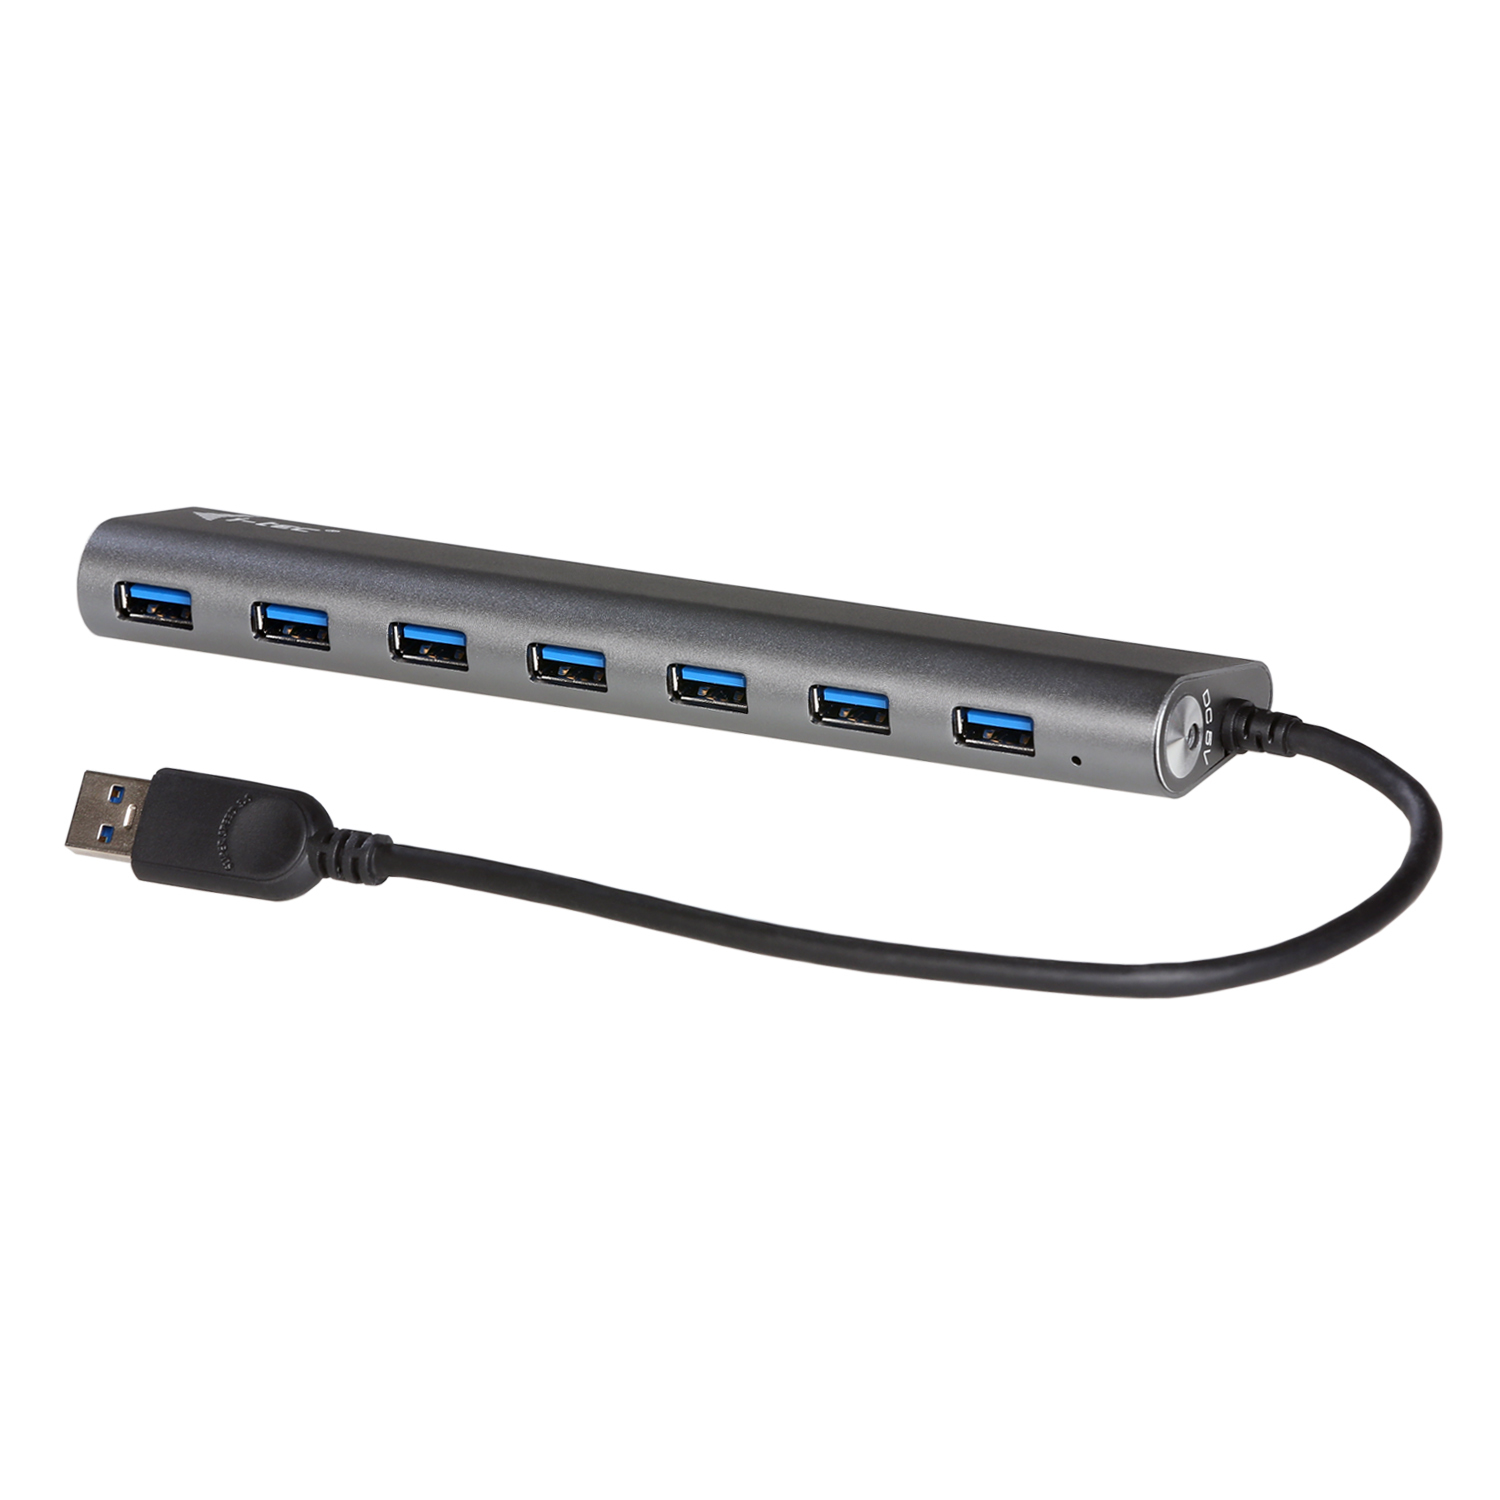  USB 3.0 Metal Charging HUB 7 Port with power adaptor 7x USB charging port. For Tablets Notebooks Ultrabooks PC